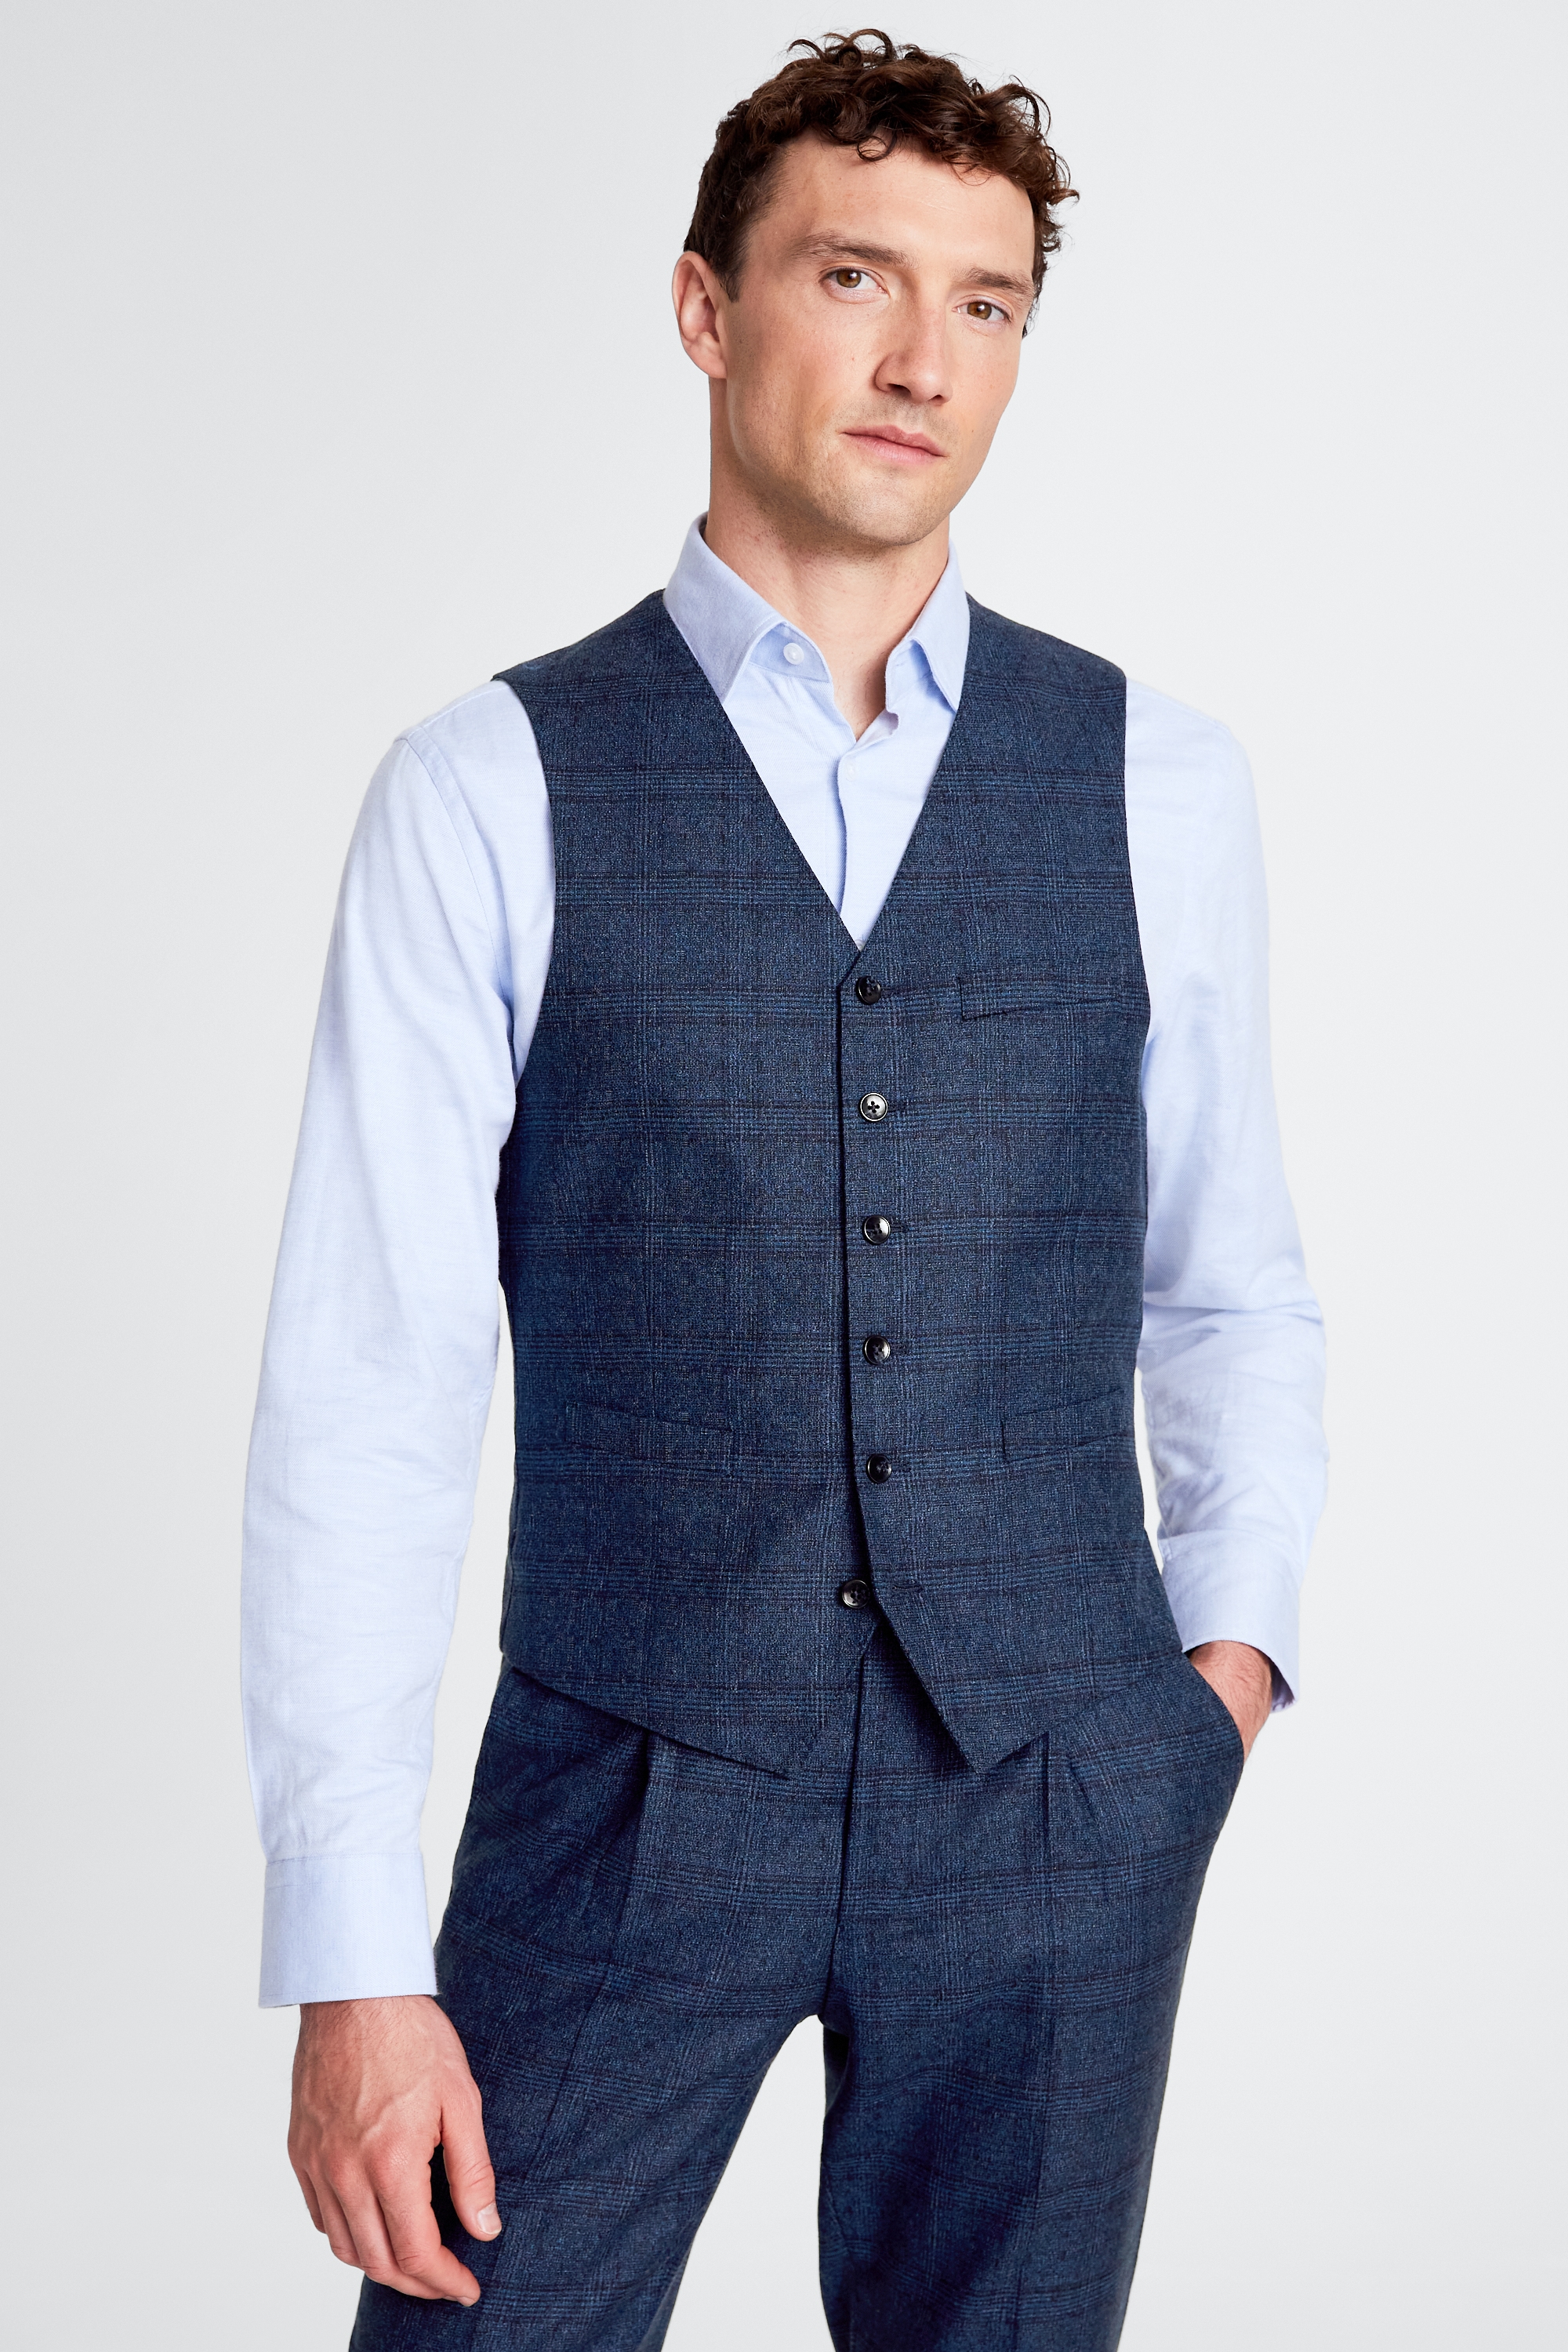 Slim Fit Blue Check Waistcoat | Buy Online at Moss